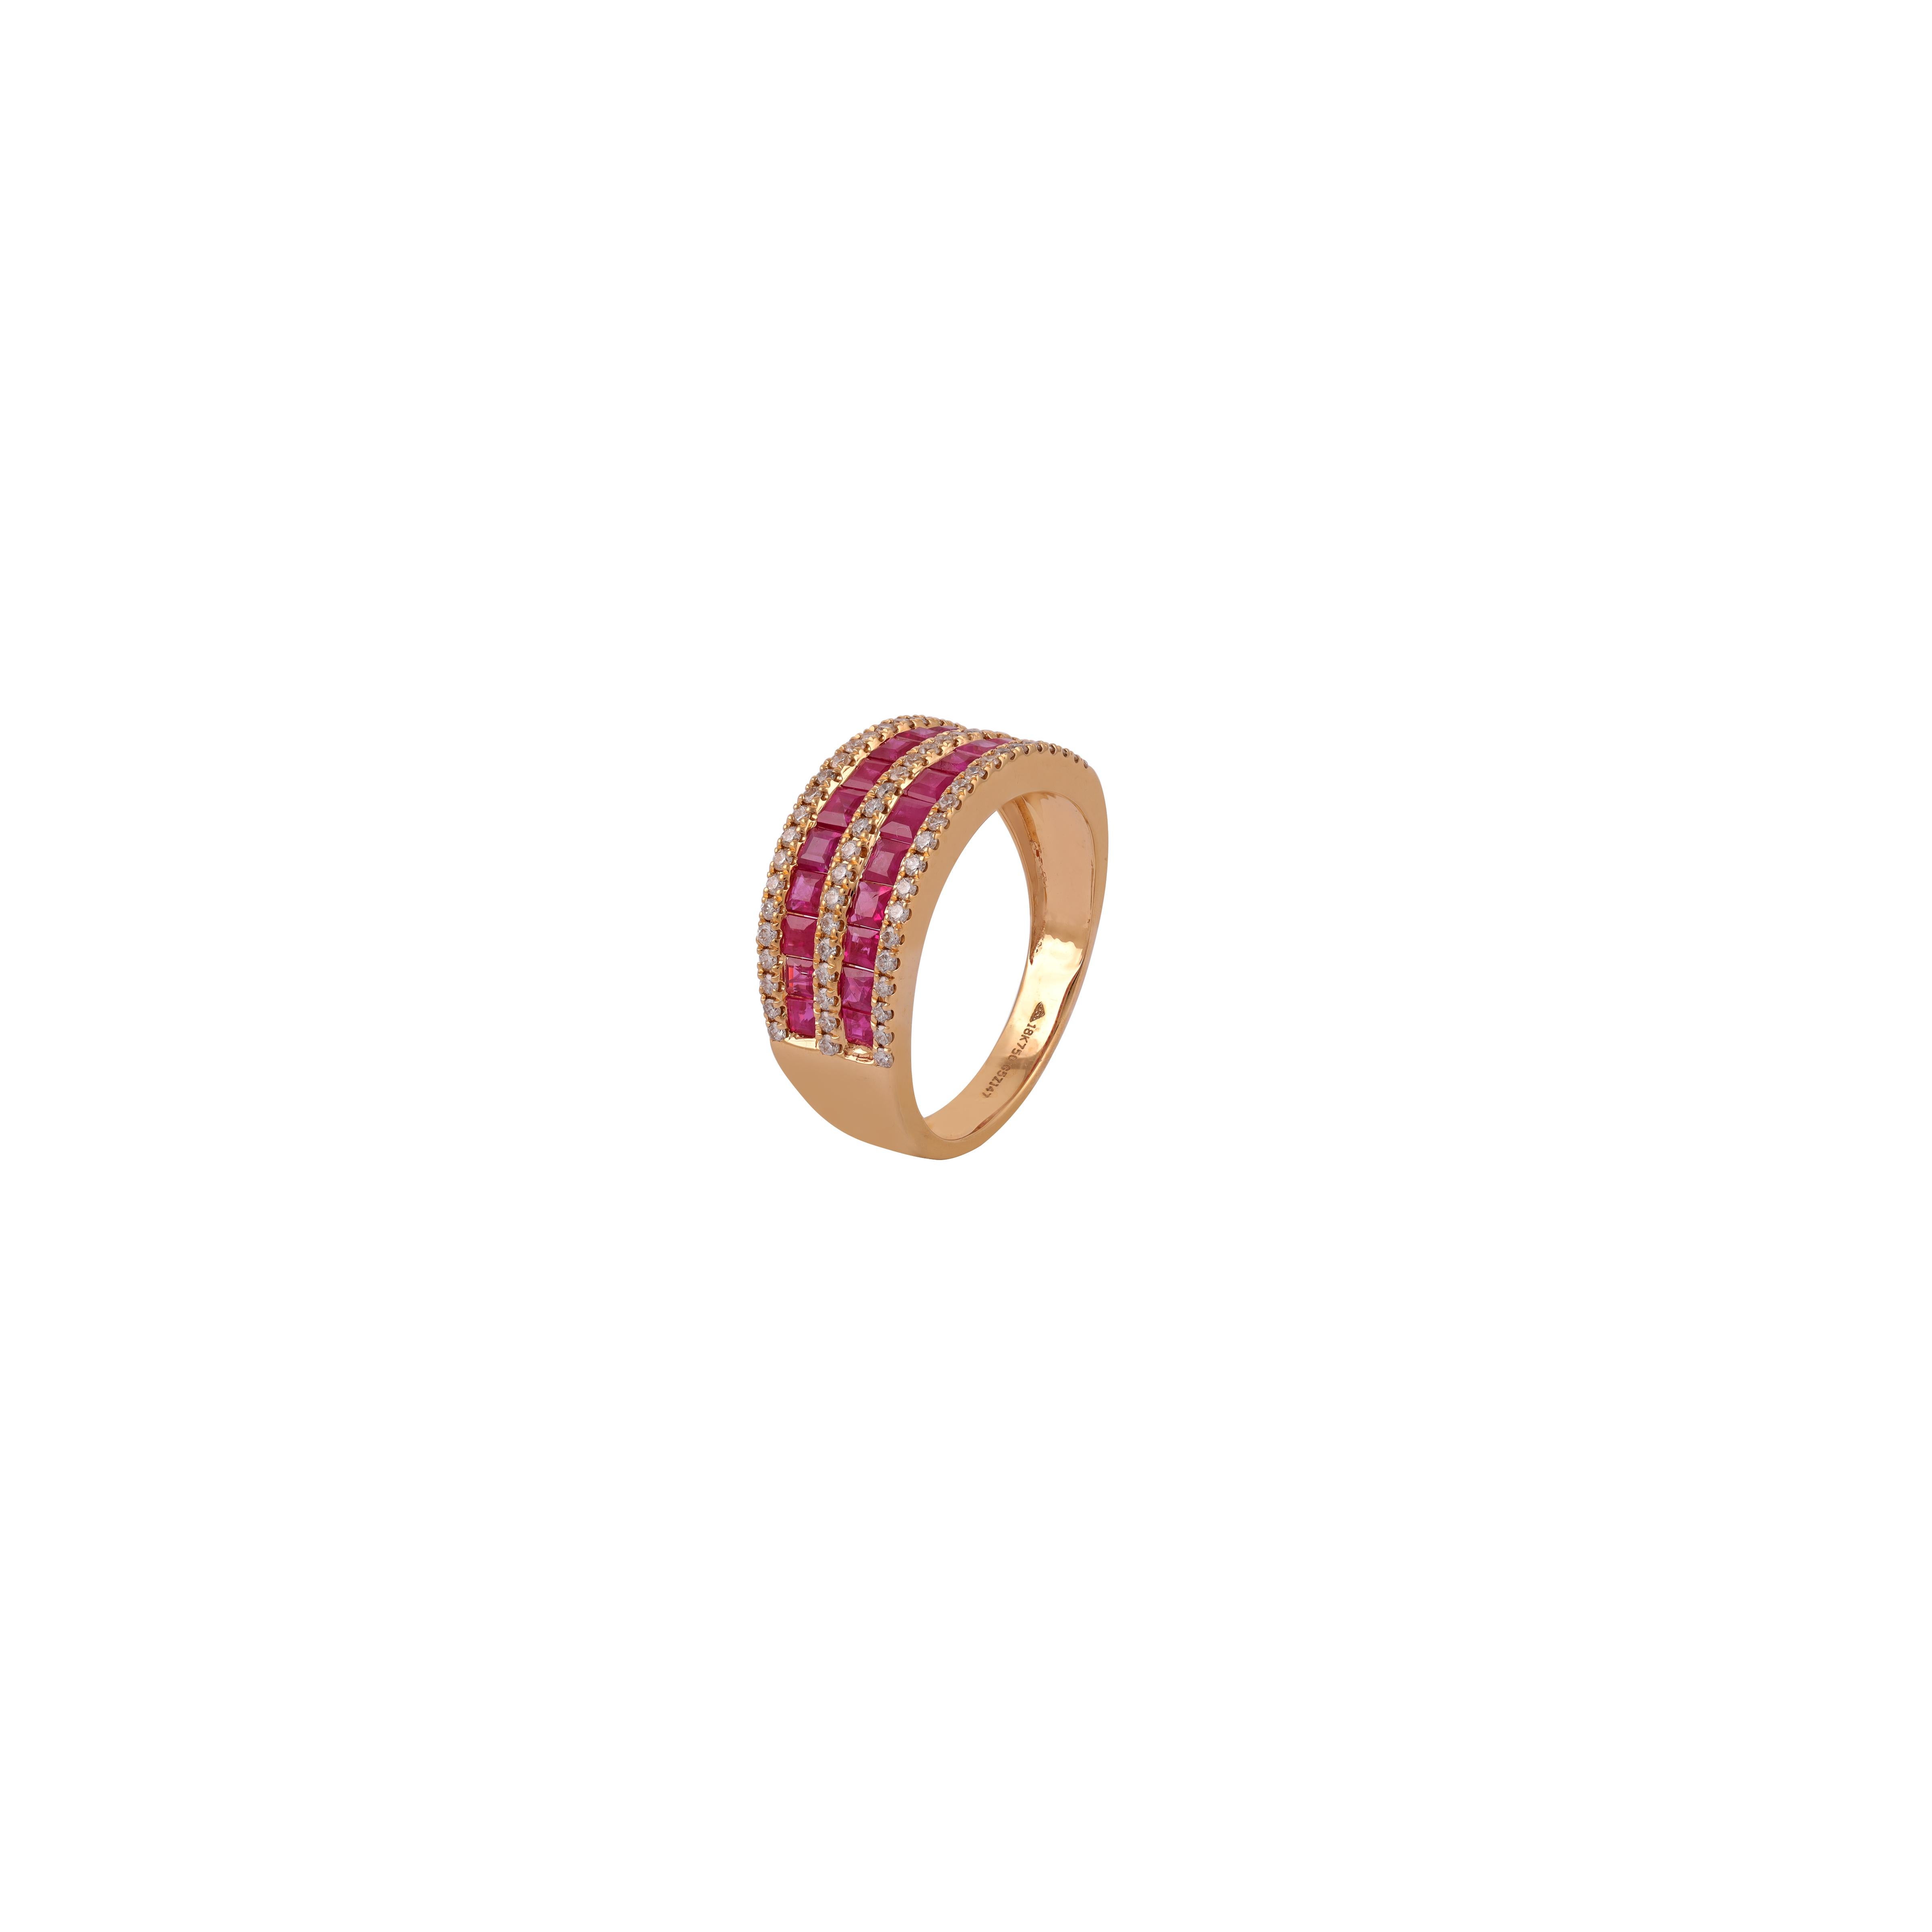 Square Cut Ruby & Diamond Ring Studded in 18k Gold For Sale